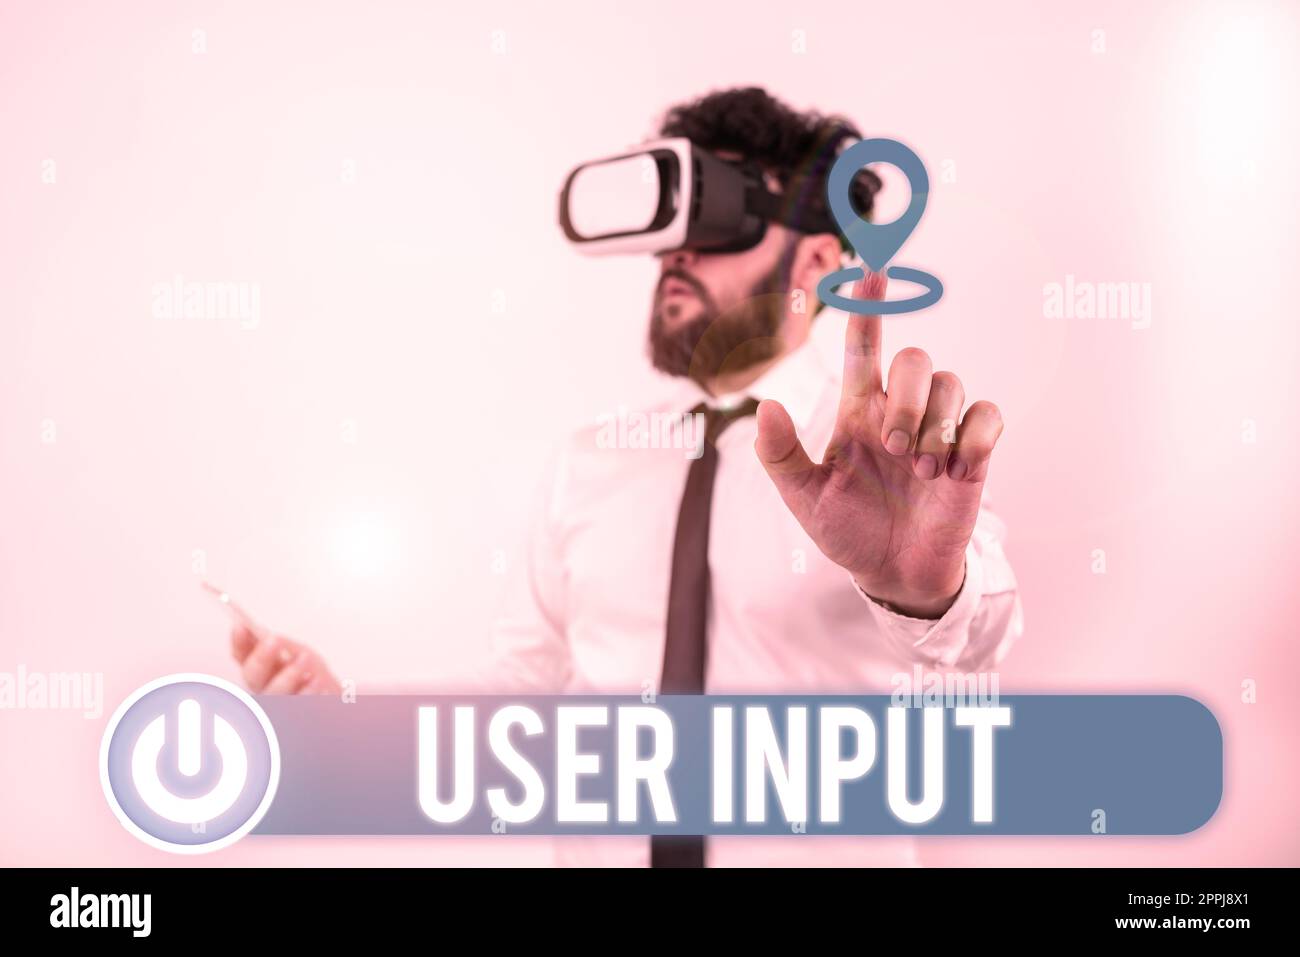 Inspiration showing sign User Input. Concept meaning Any information or data that is sent to a computer for processing Stock Photo